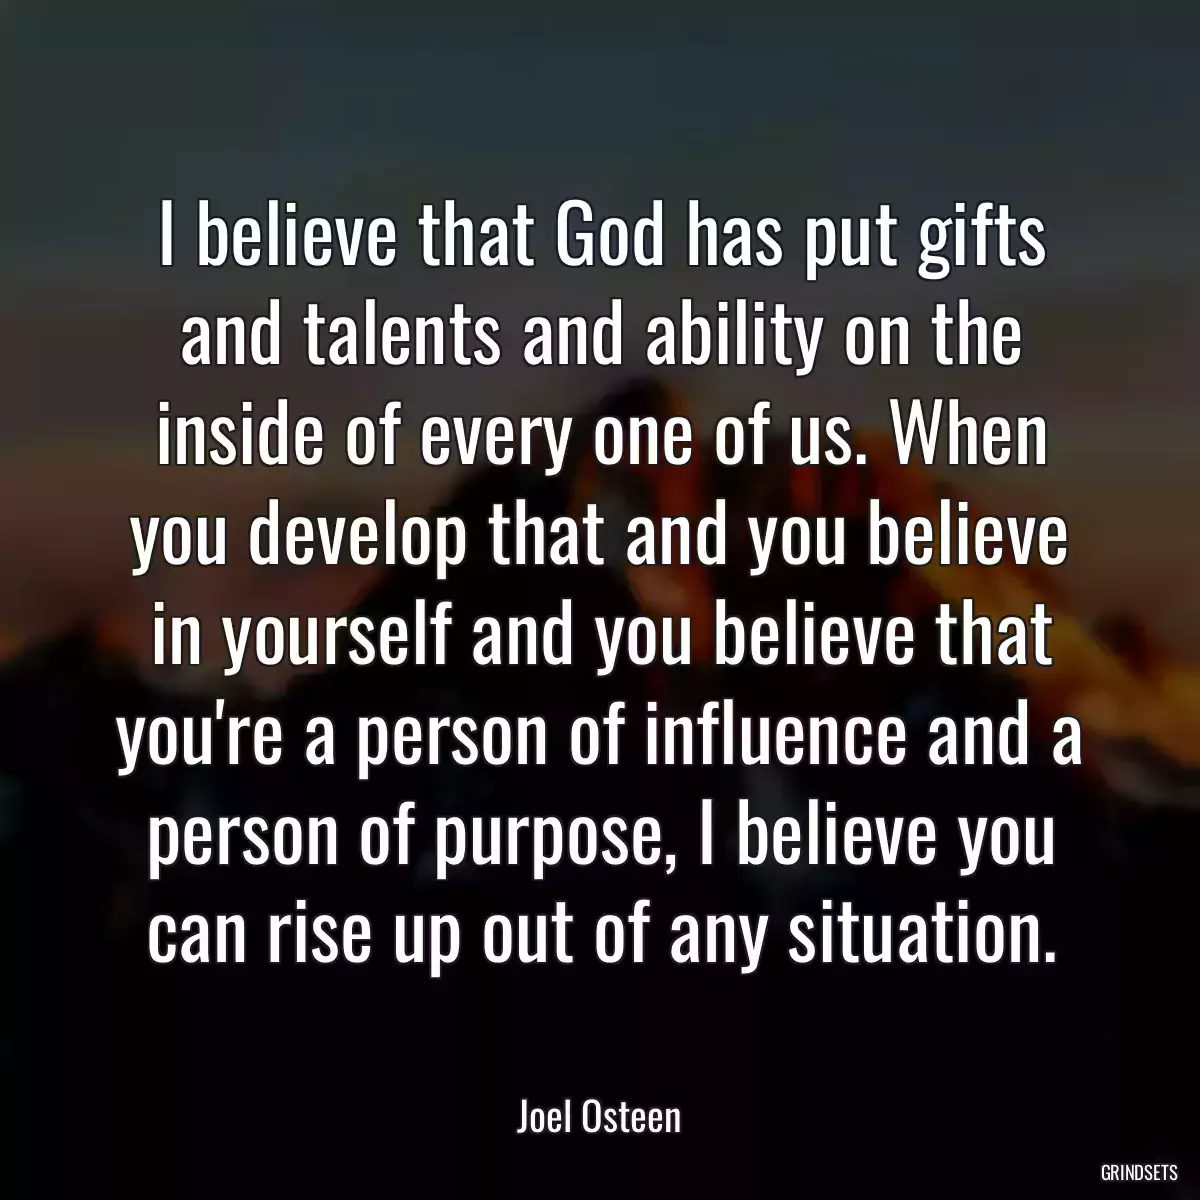 I believe that God has put gifts and talents and ability on the inside of every one of us. When you develop that and you believe in yourself and you believe that you\'re a person of influence and a person of purpose, I believe you can rise up out of any situation.